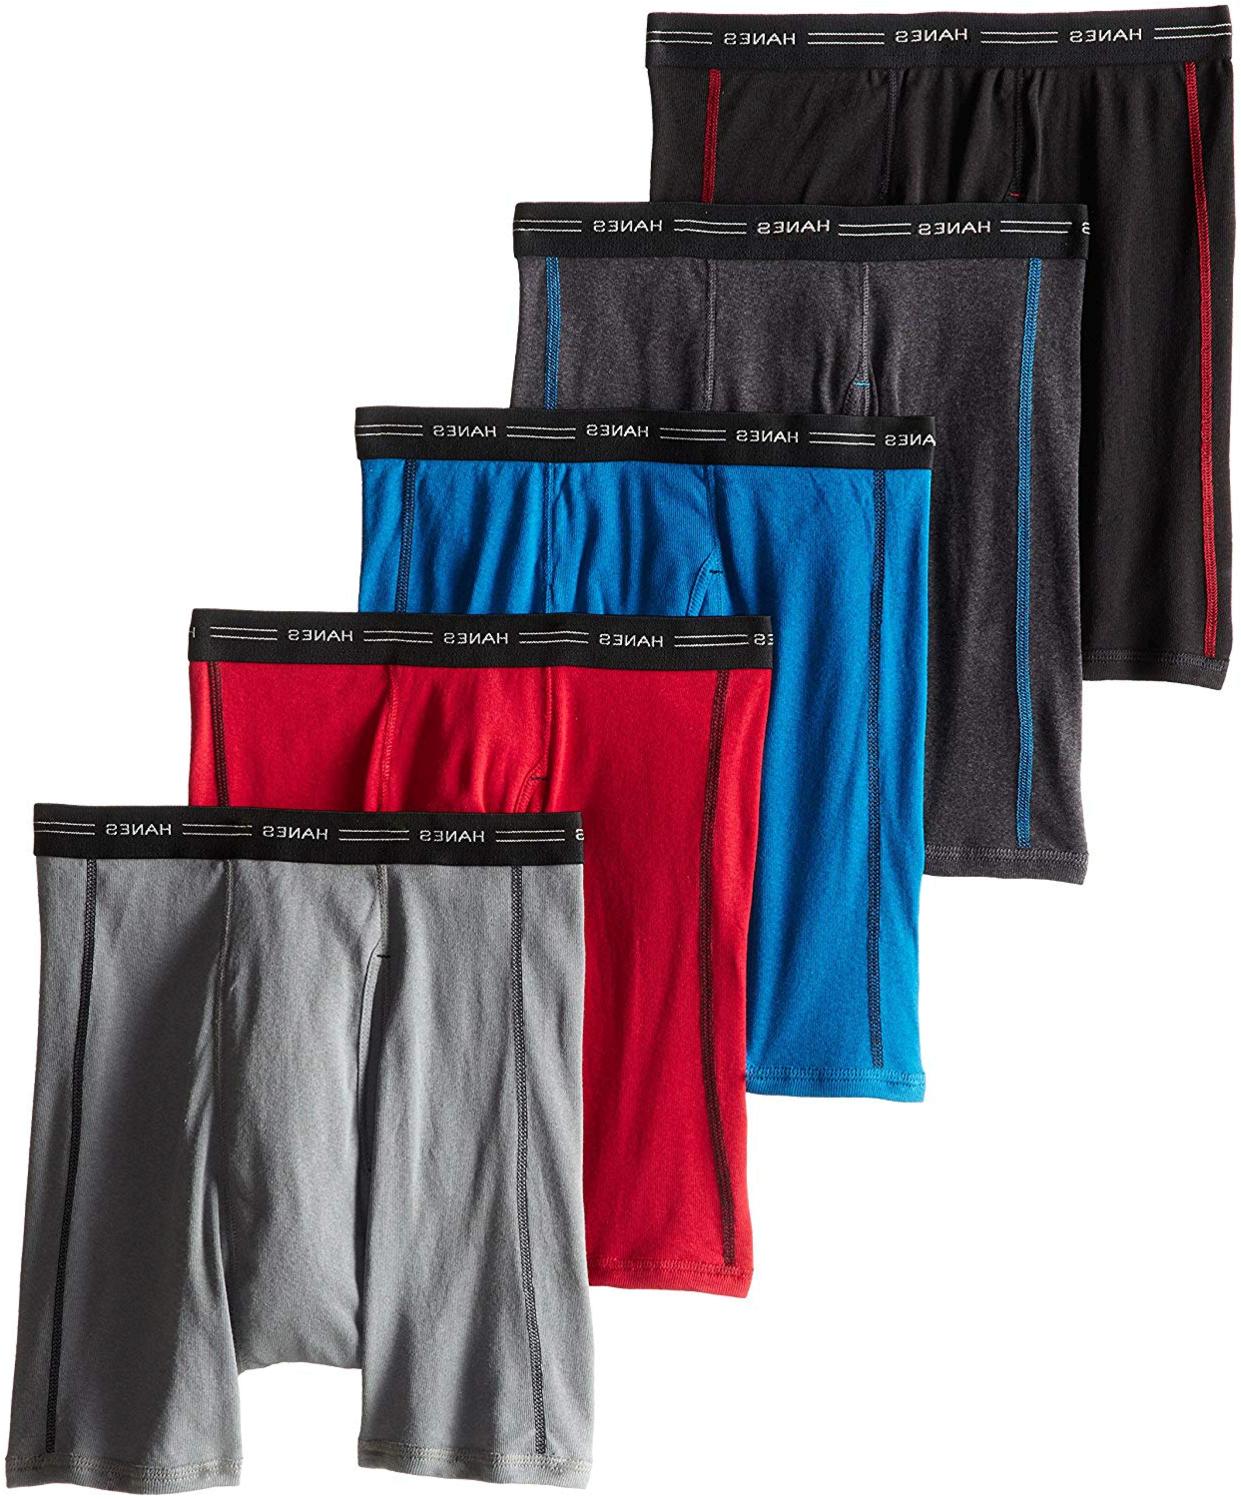 Hanes Men's 5-Pack Sports-Inspired Boxer Brief ,, Assorted Color, Size ...